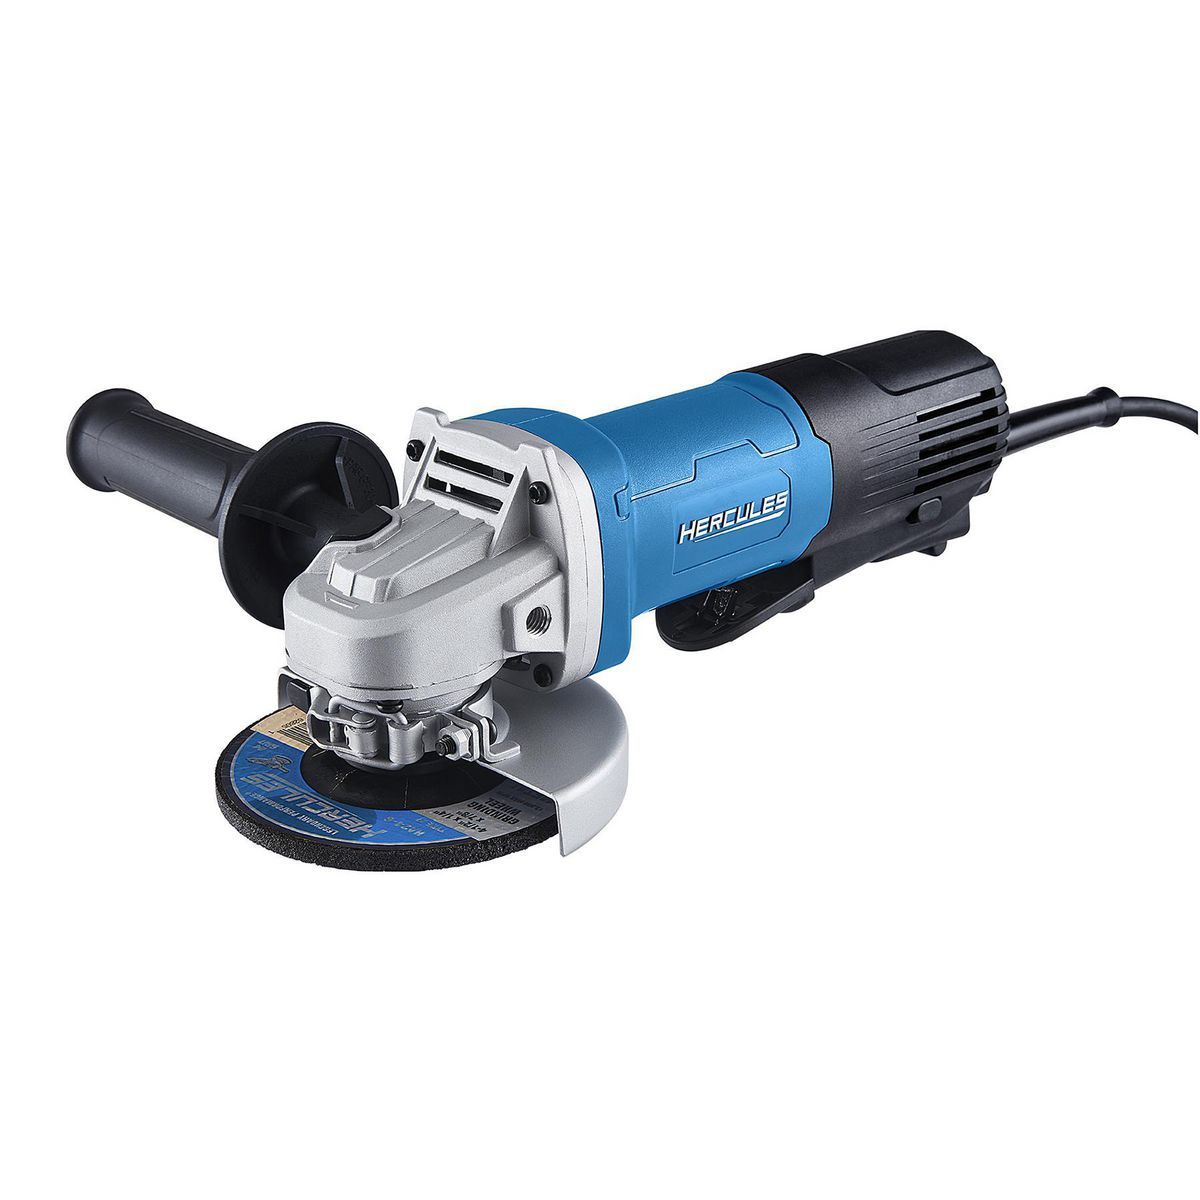 HERCULES 11 Amp, 4-1/2 in. Paddle Switch Angle Grinder